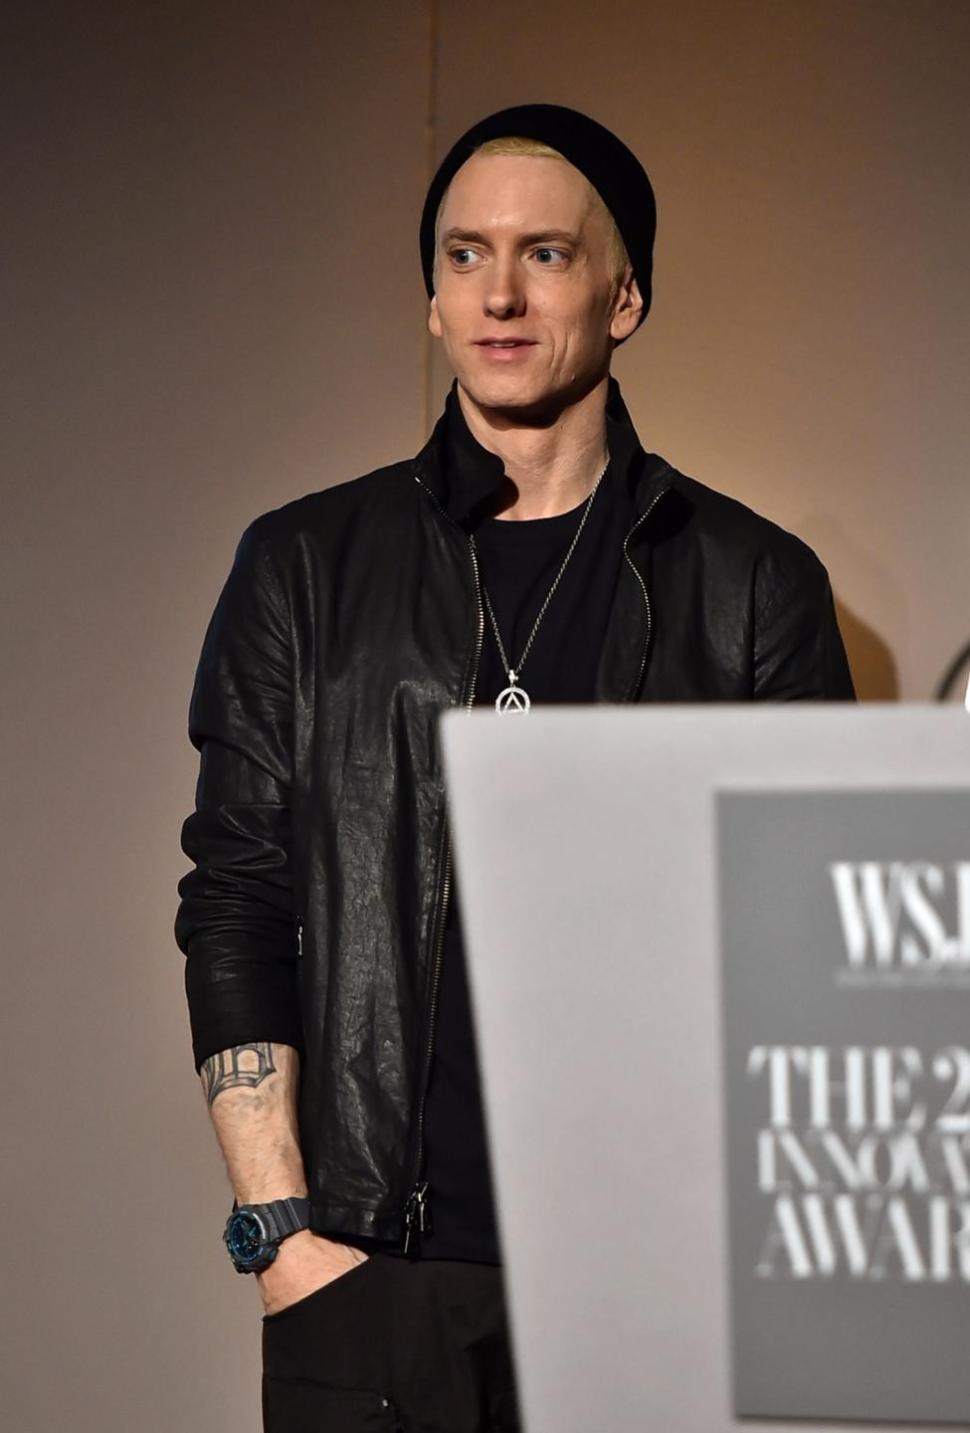 Eminem pictured at the event honoring his mentor Dr. Dre.